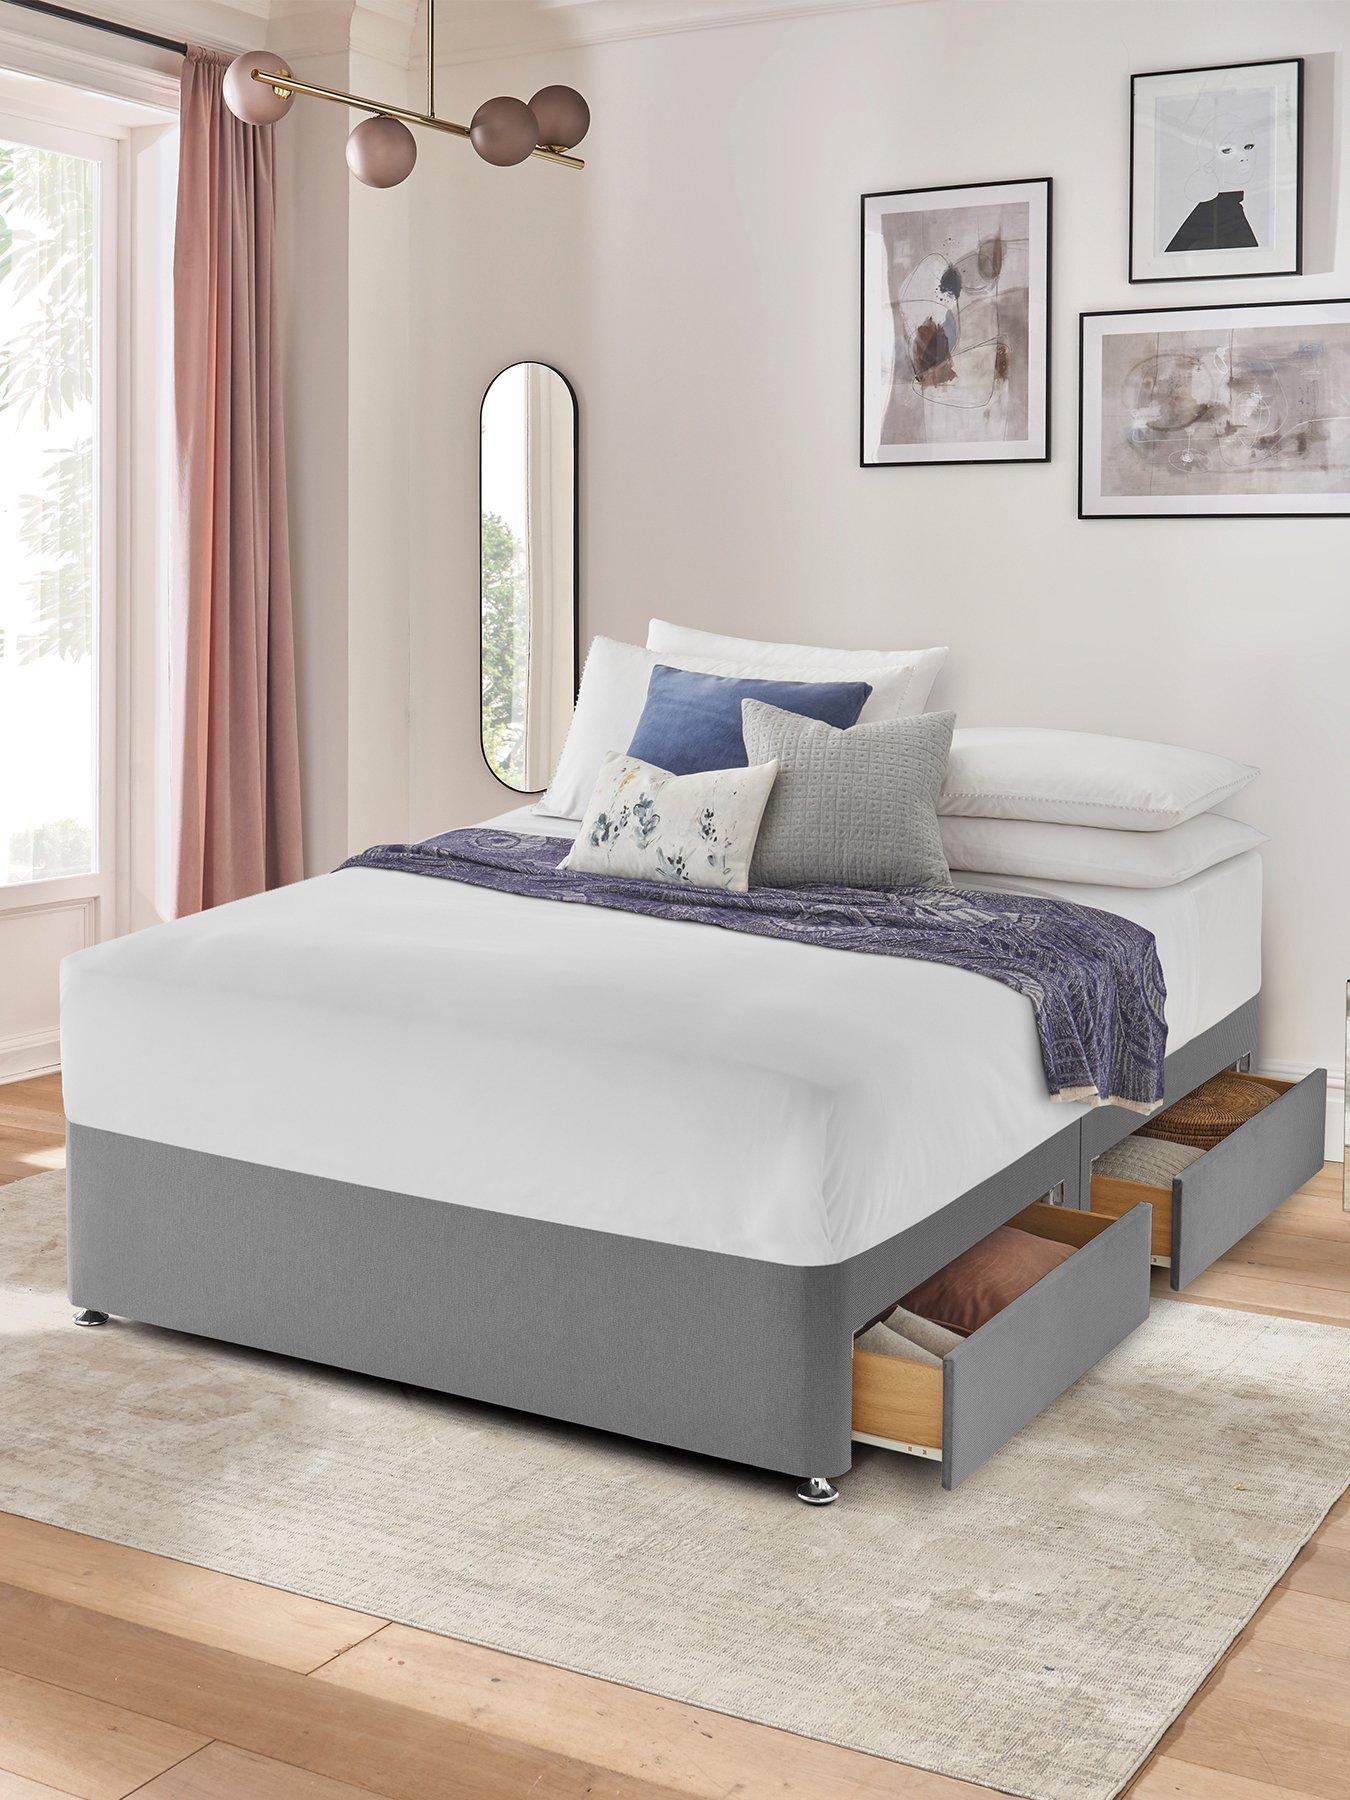 Silentnight Fabric Divan Bed With Storage Options, Base Only  Headboard Not Included - Small Double